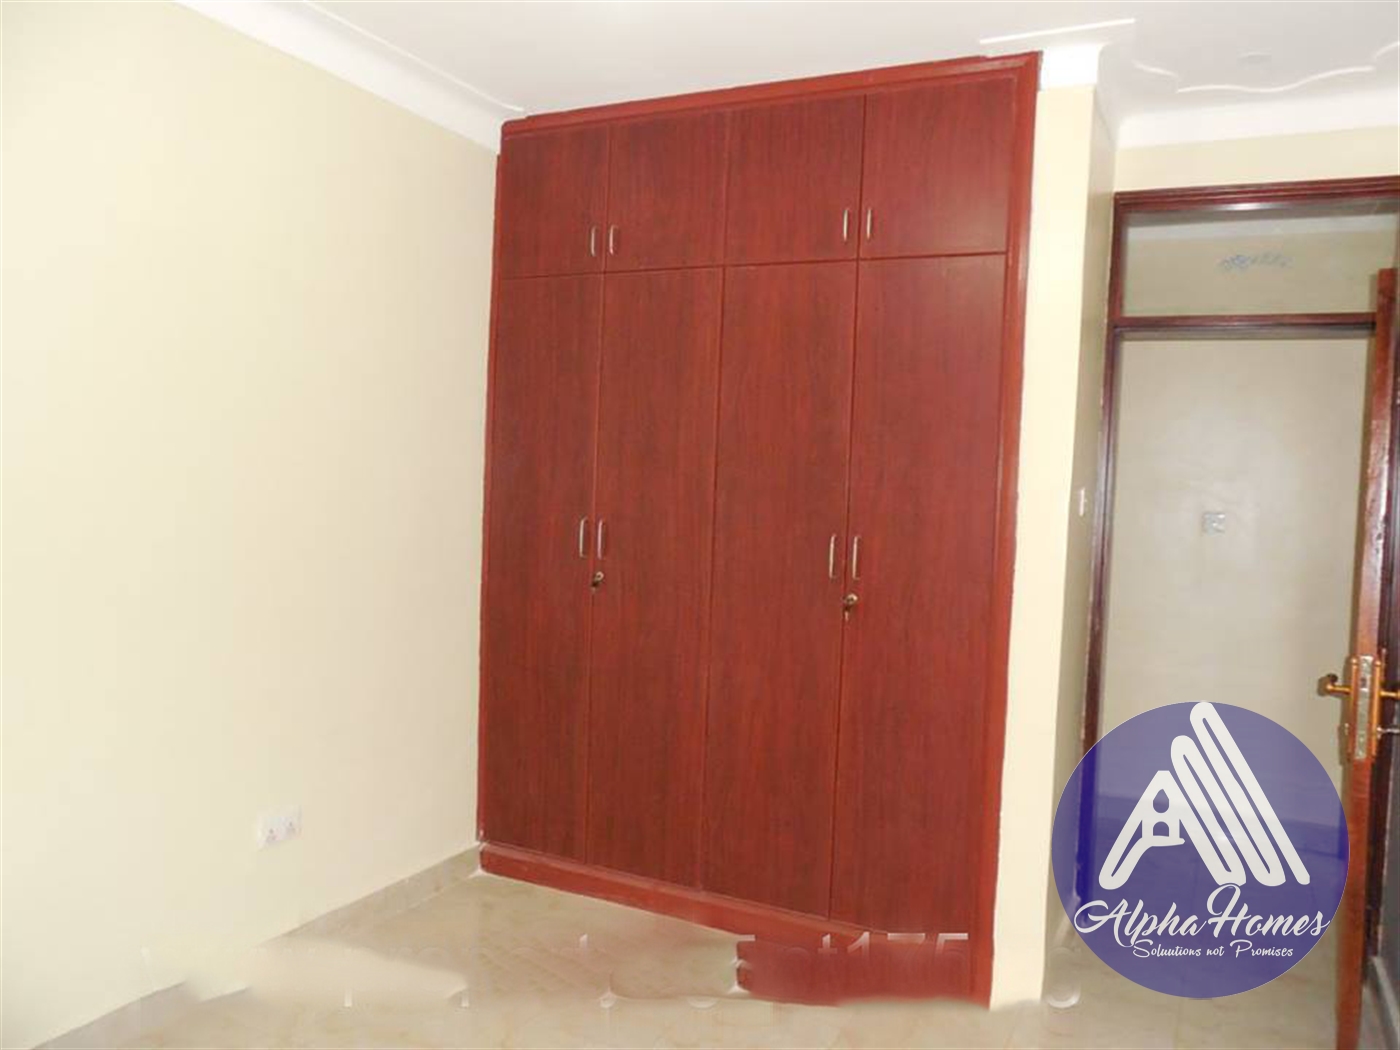 Apartment for rent in Mukono Wakiso